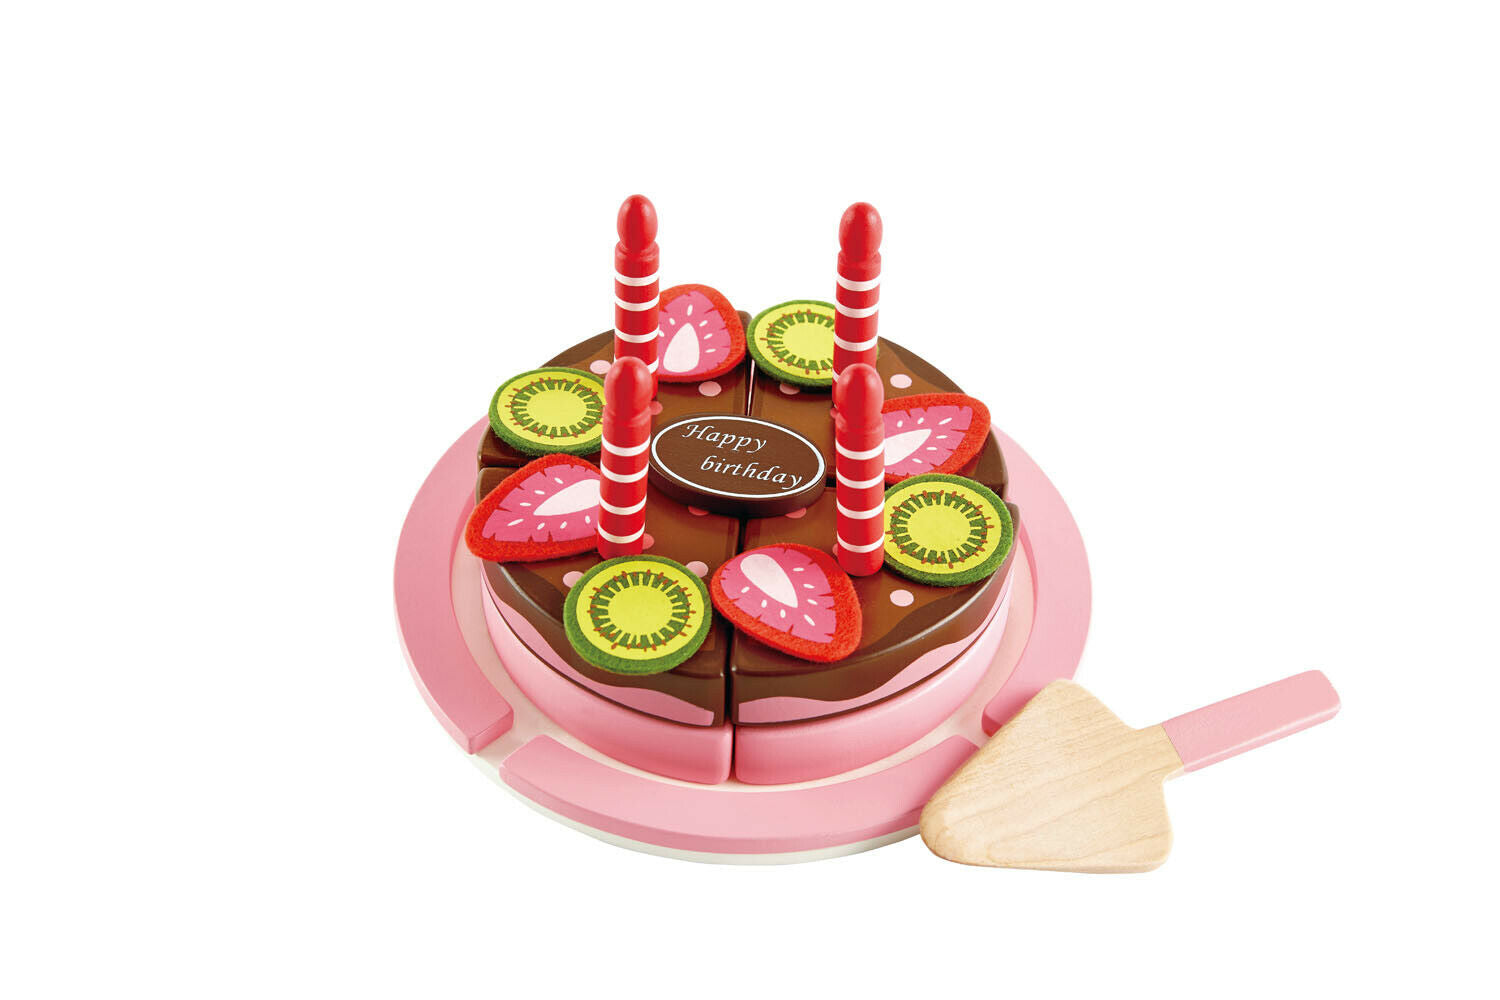 E3140 HAPE Double Flavored Birthday Cake [Playfully Delicious] Children 3 Yrs+